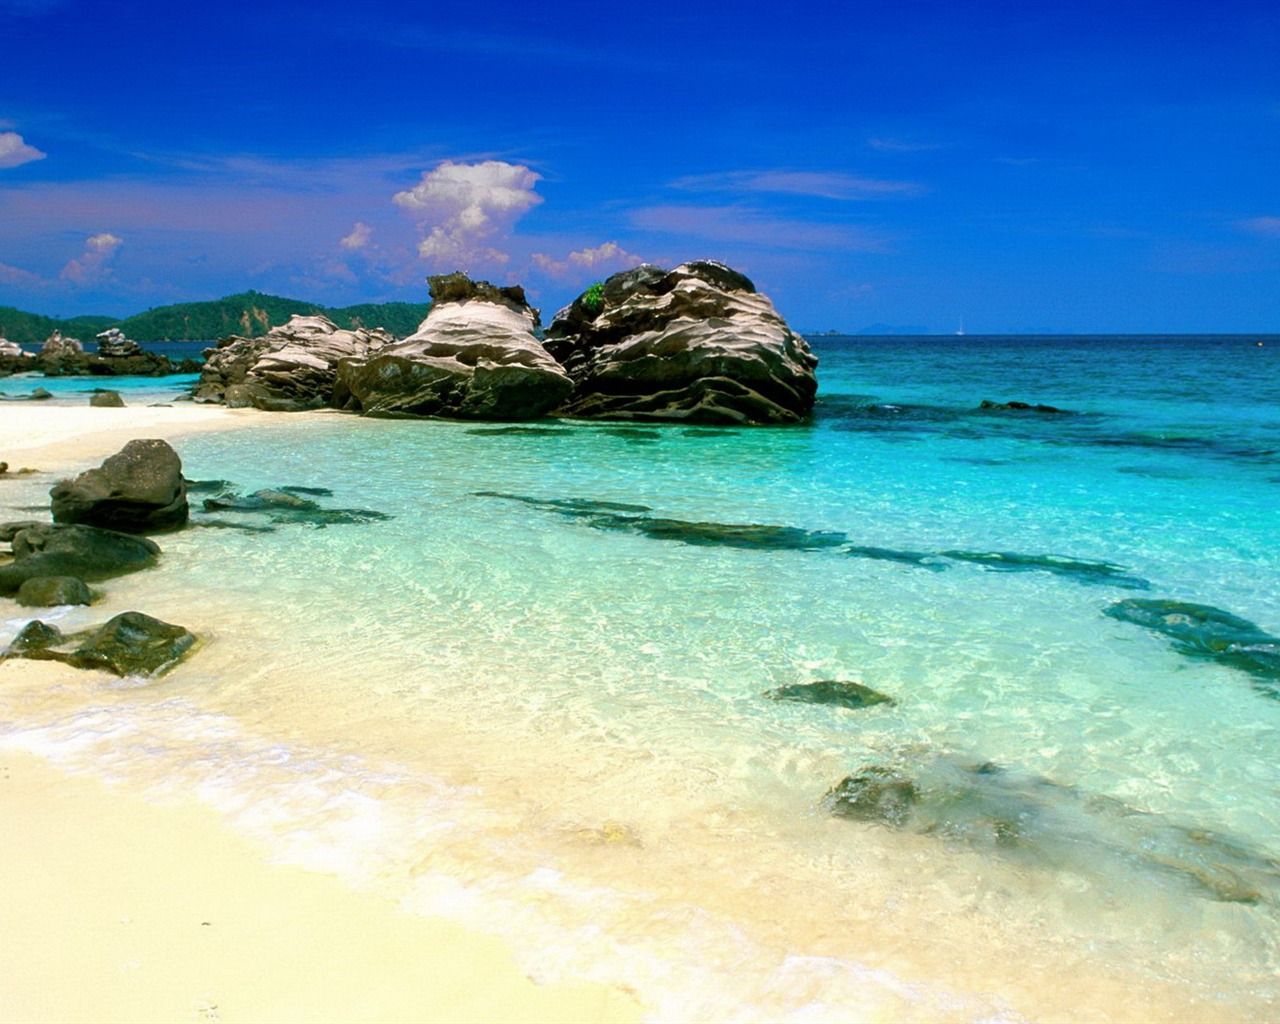 Thailand's natural beauty wallpapers #3 - 1280x1024